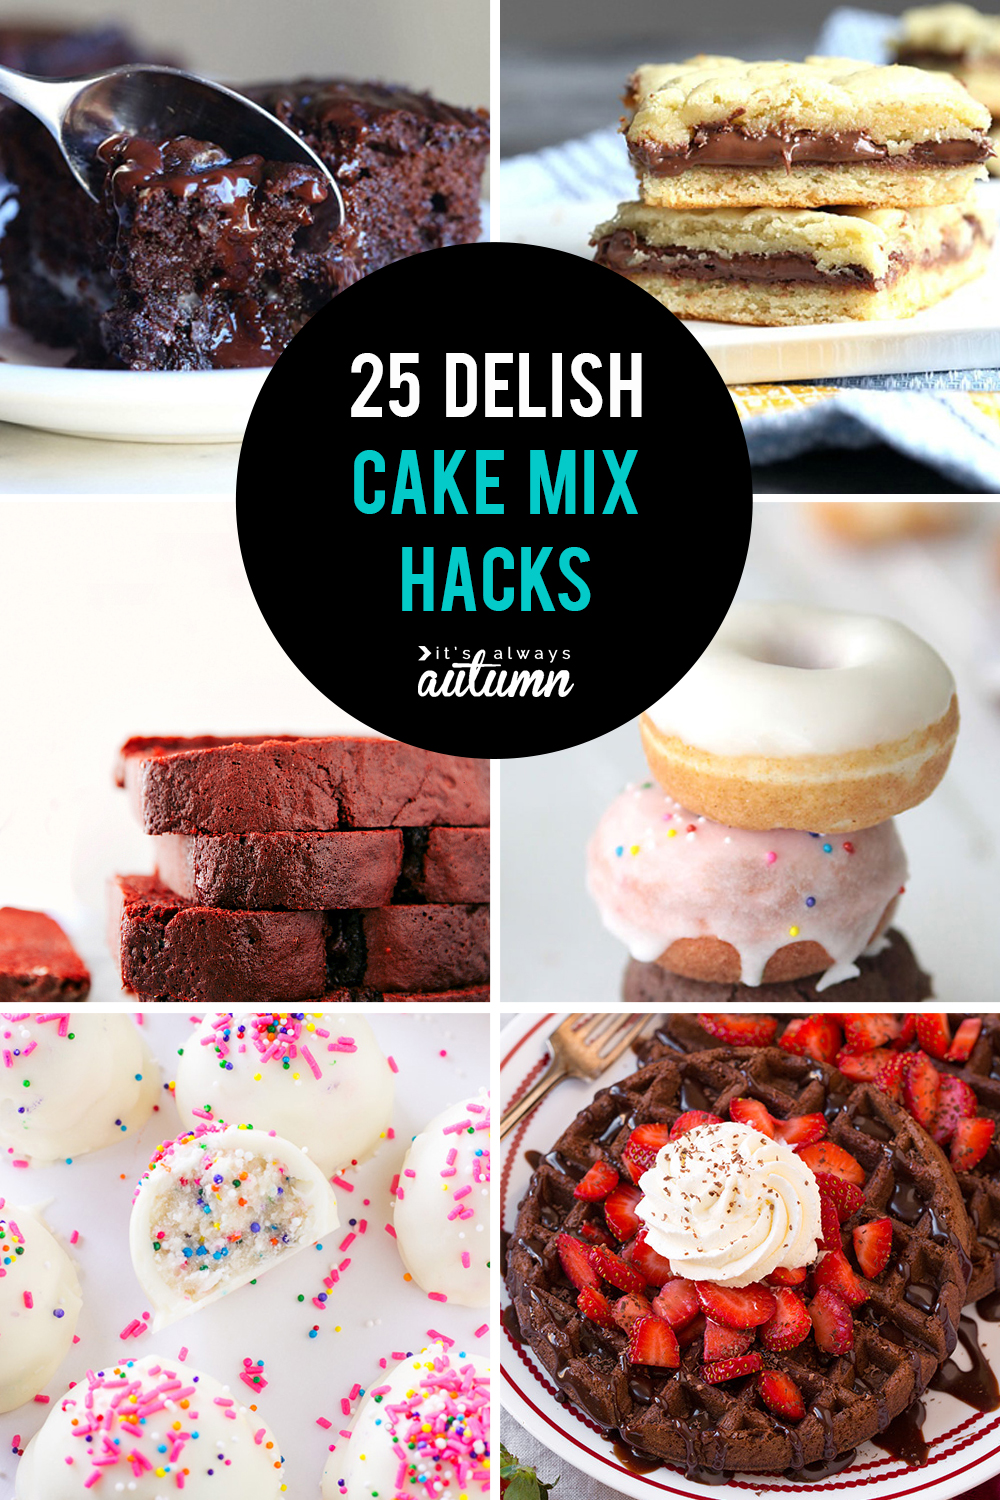 25 delicious cake mix hacks. These delicious cake mix recipes are easy and turn out amazing!